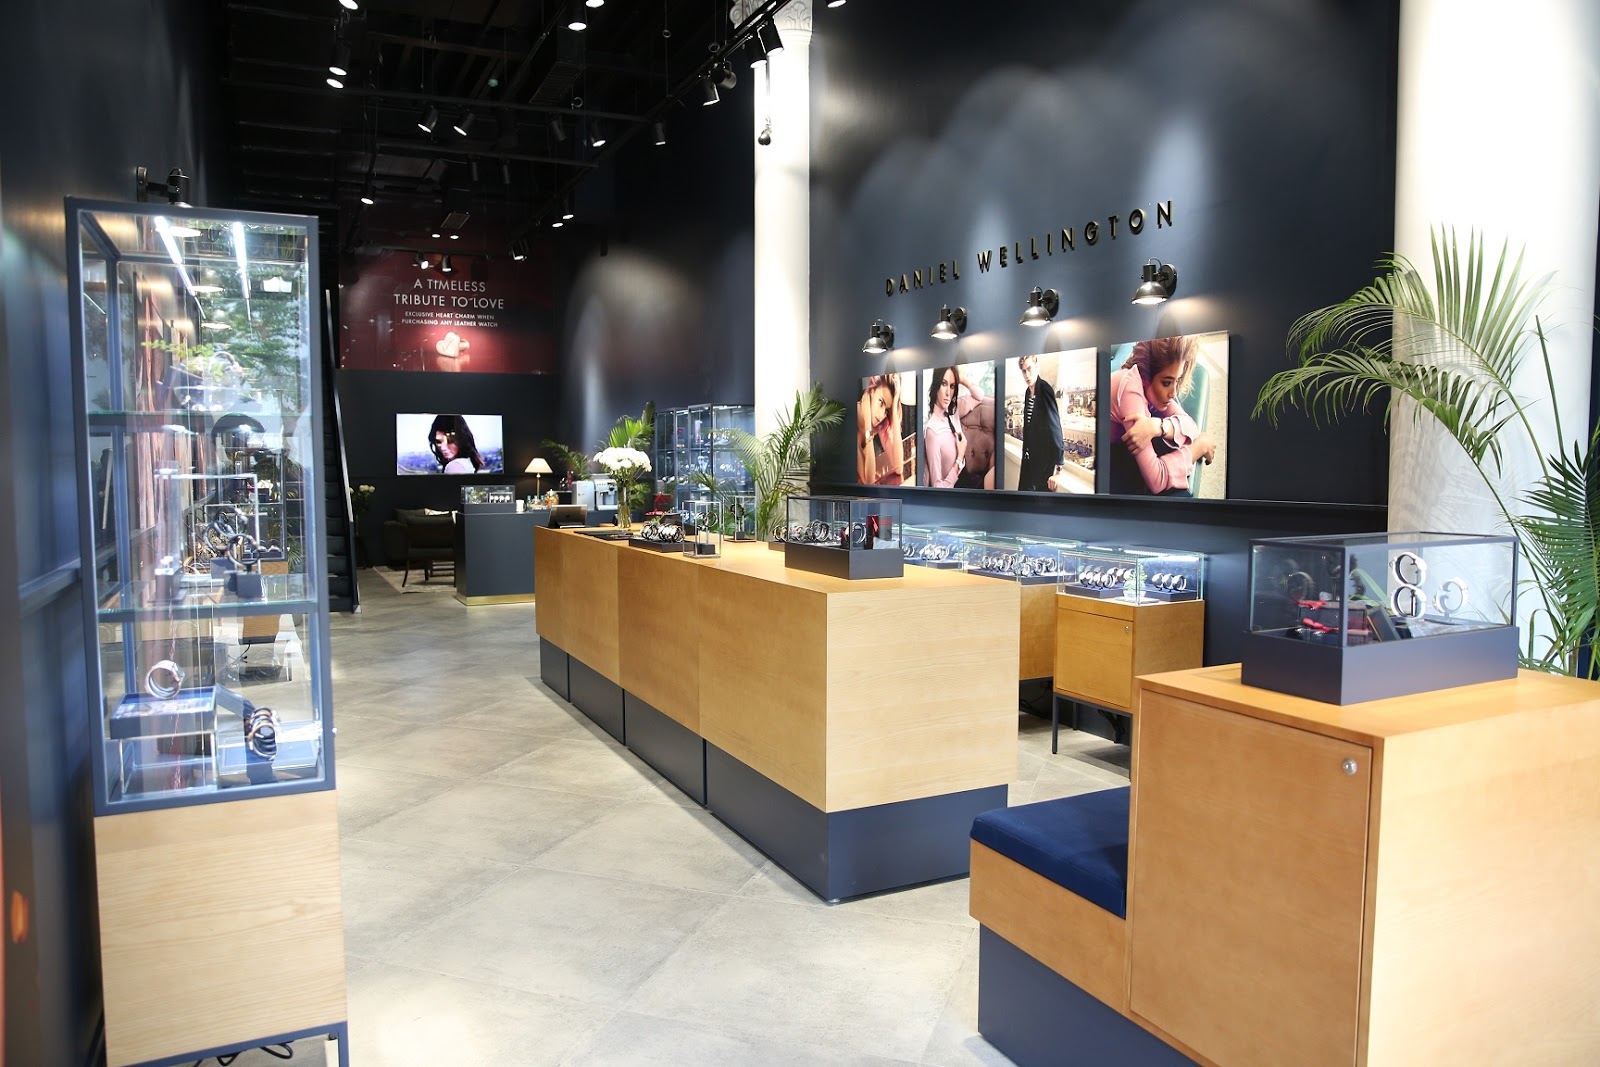 DANIEL WELLINGTON LAUNCHES ITS FIRST STORE INDIA